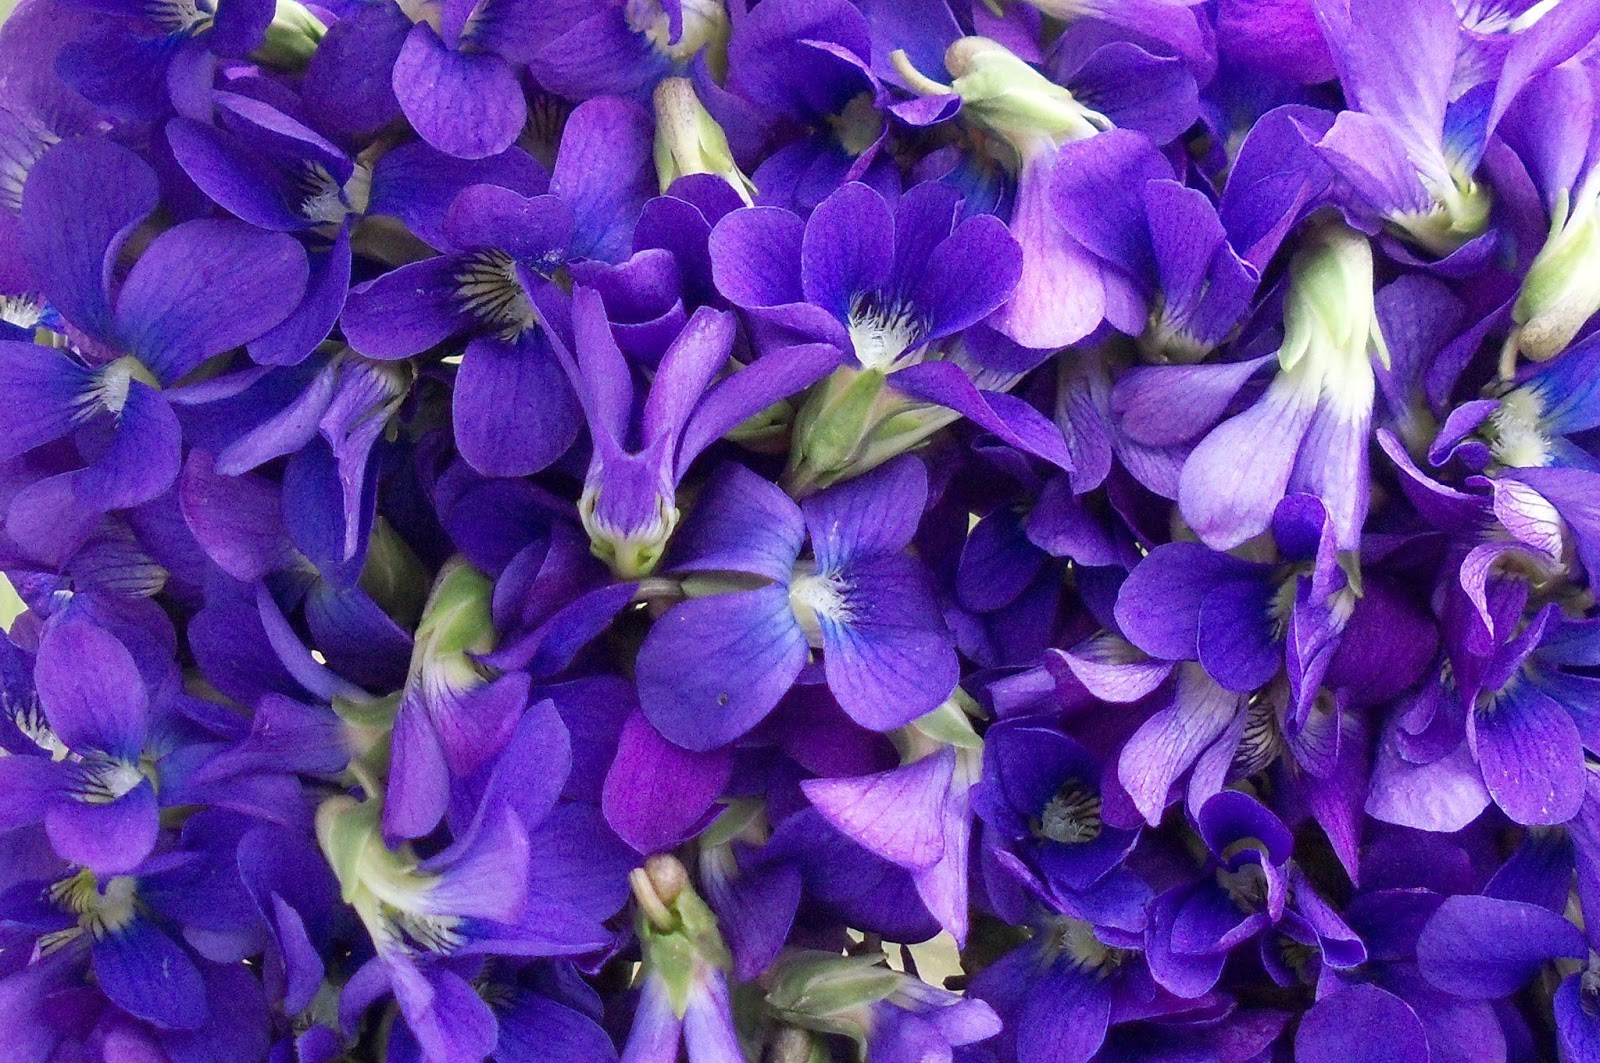 The Essential Herbal Blog: Violets, Jewels of the Field